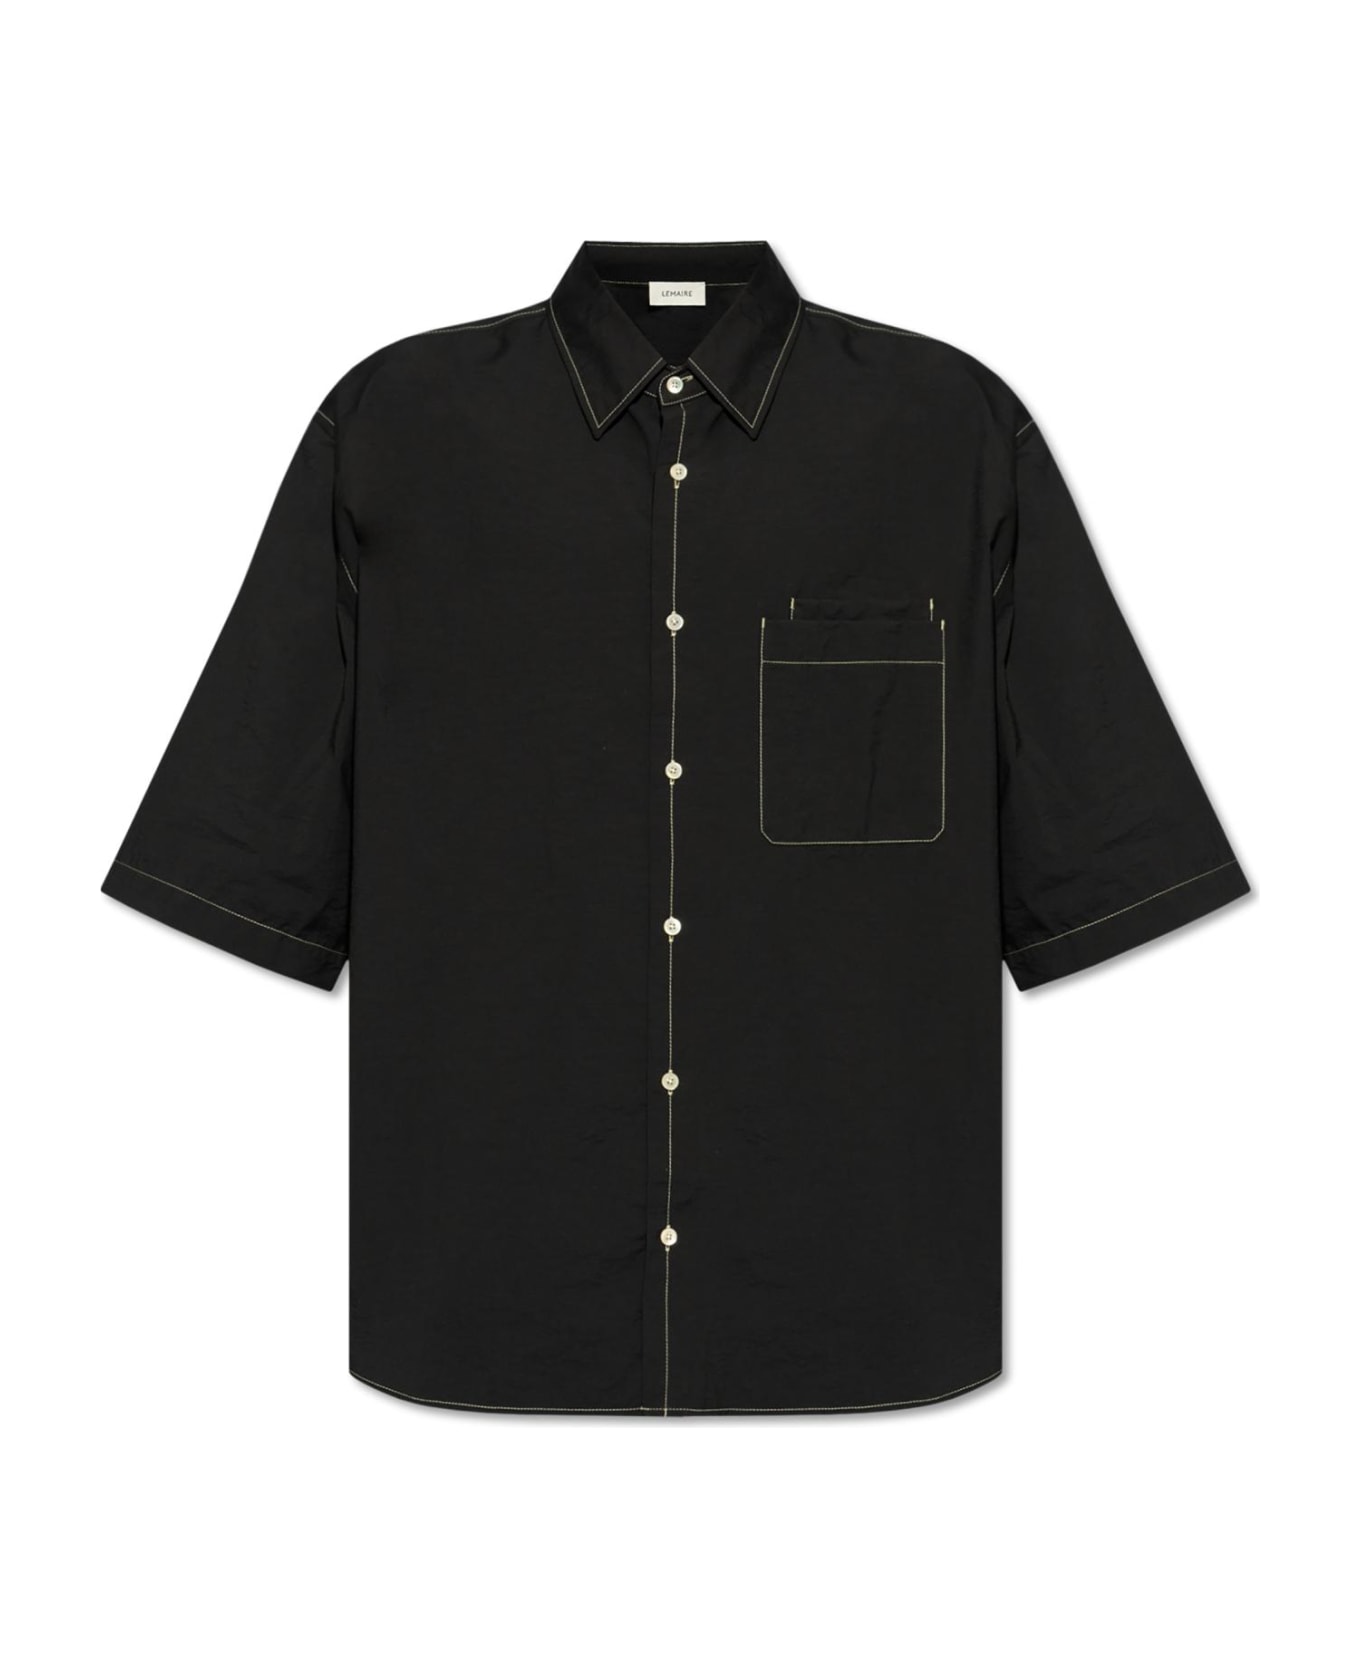 Lemaire Shirt With Short Sleeves - BLACK シャツ